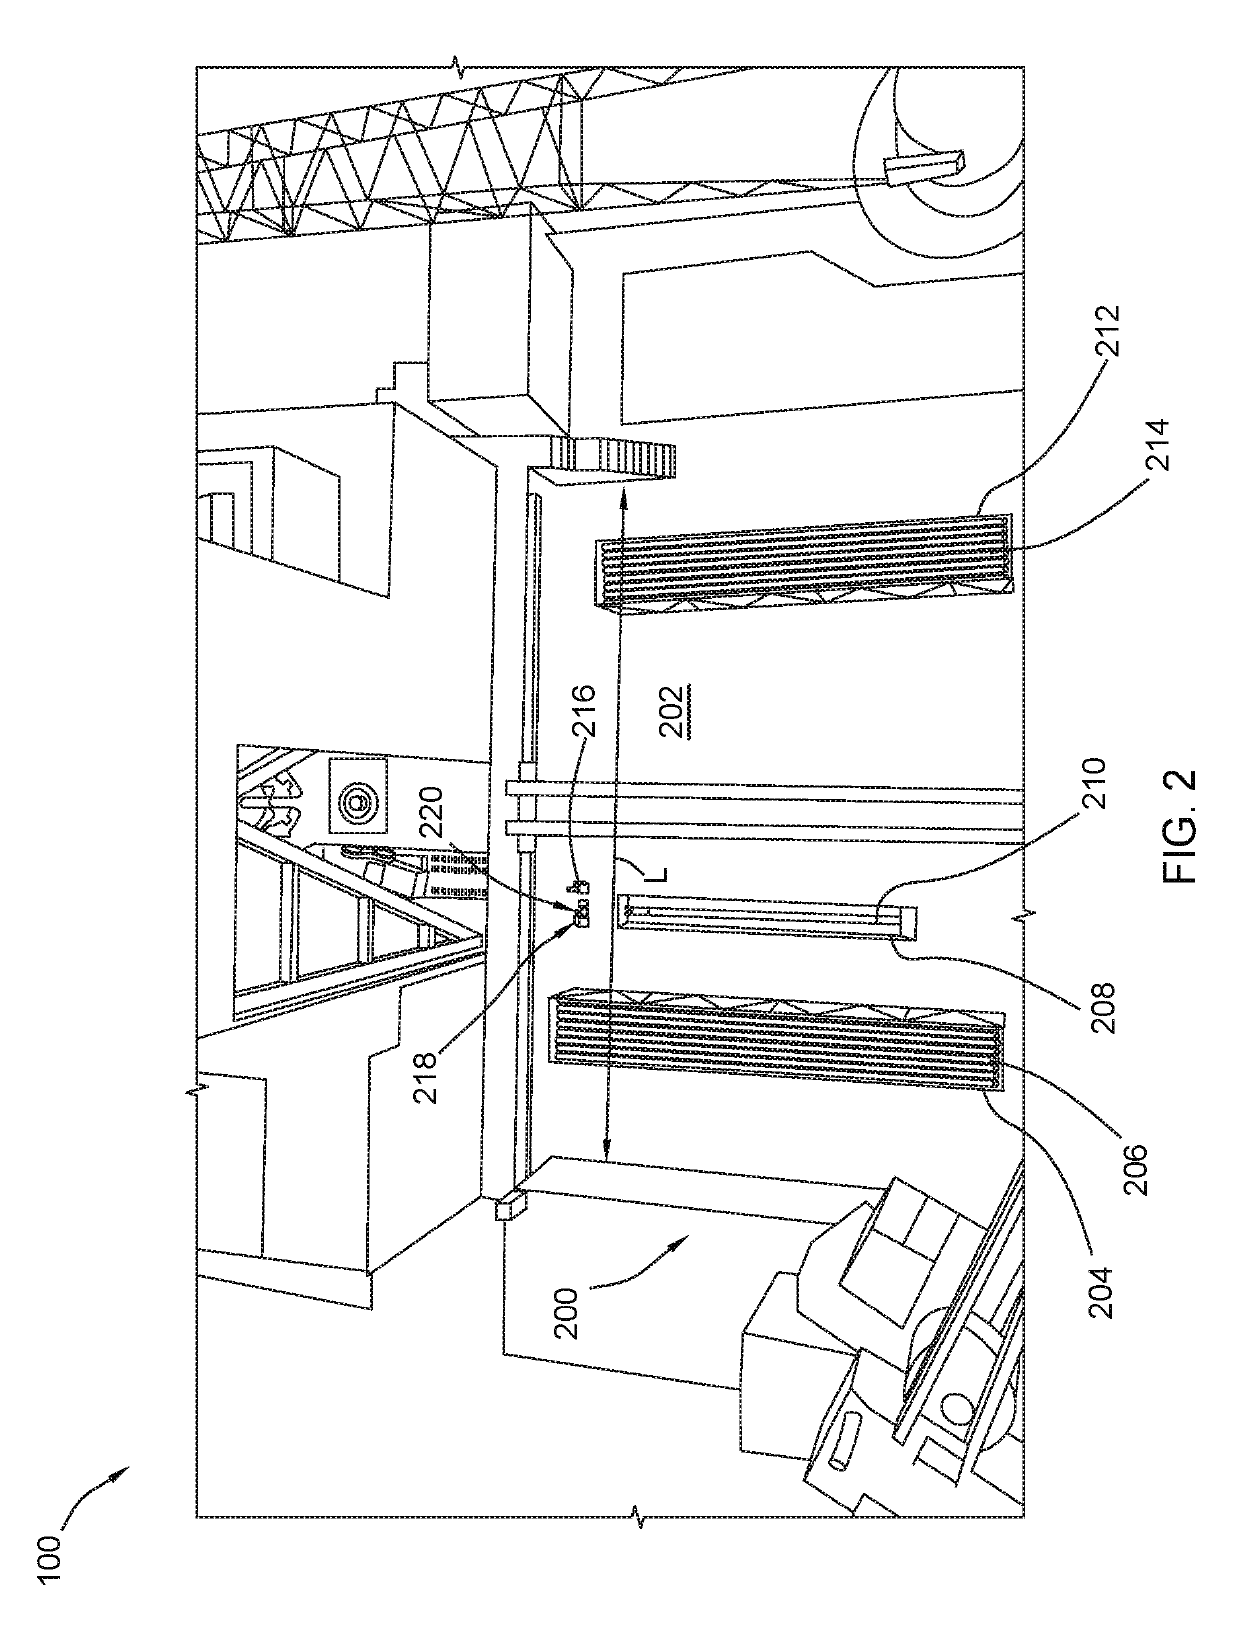 System and method for conducting subterranean operations